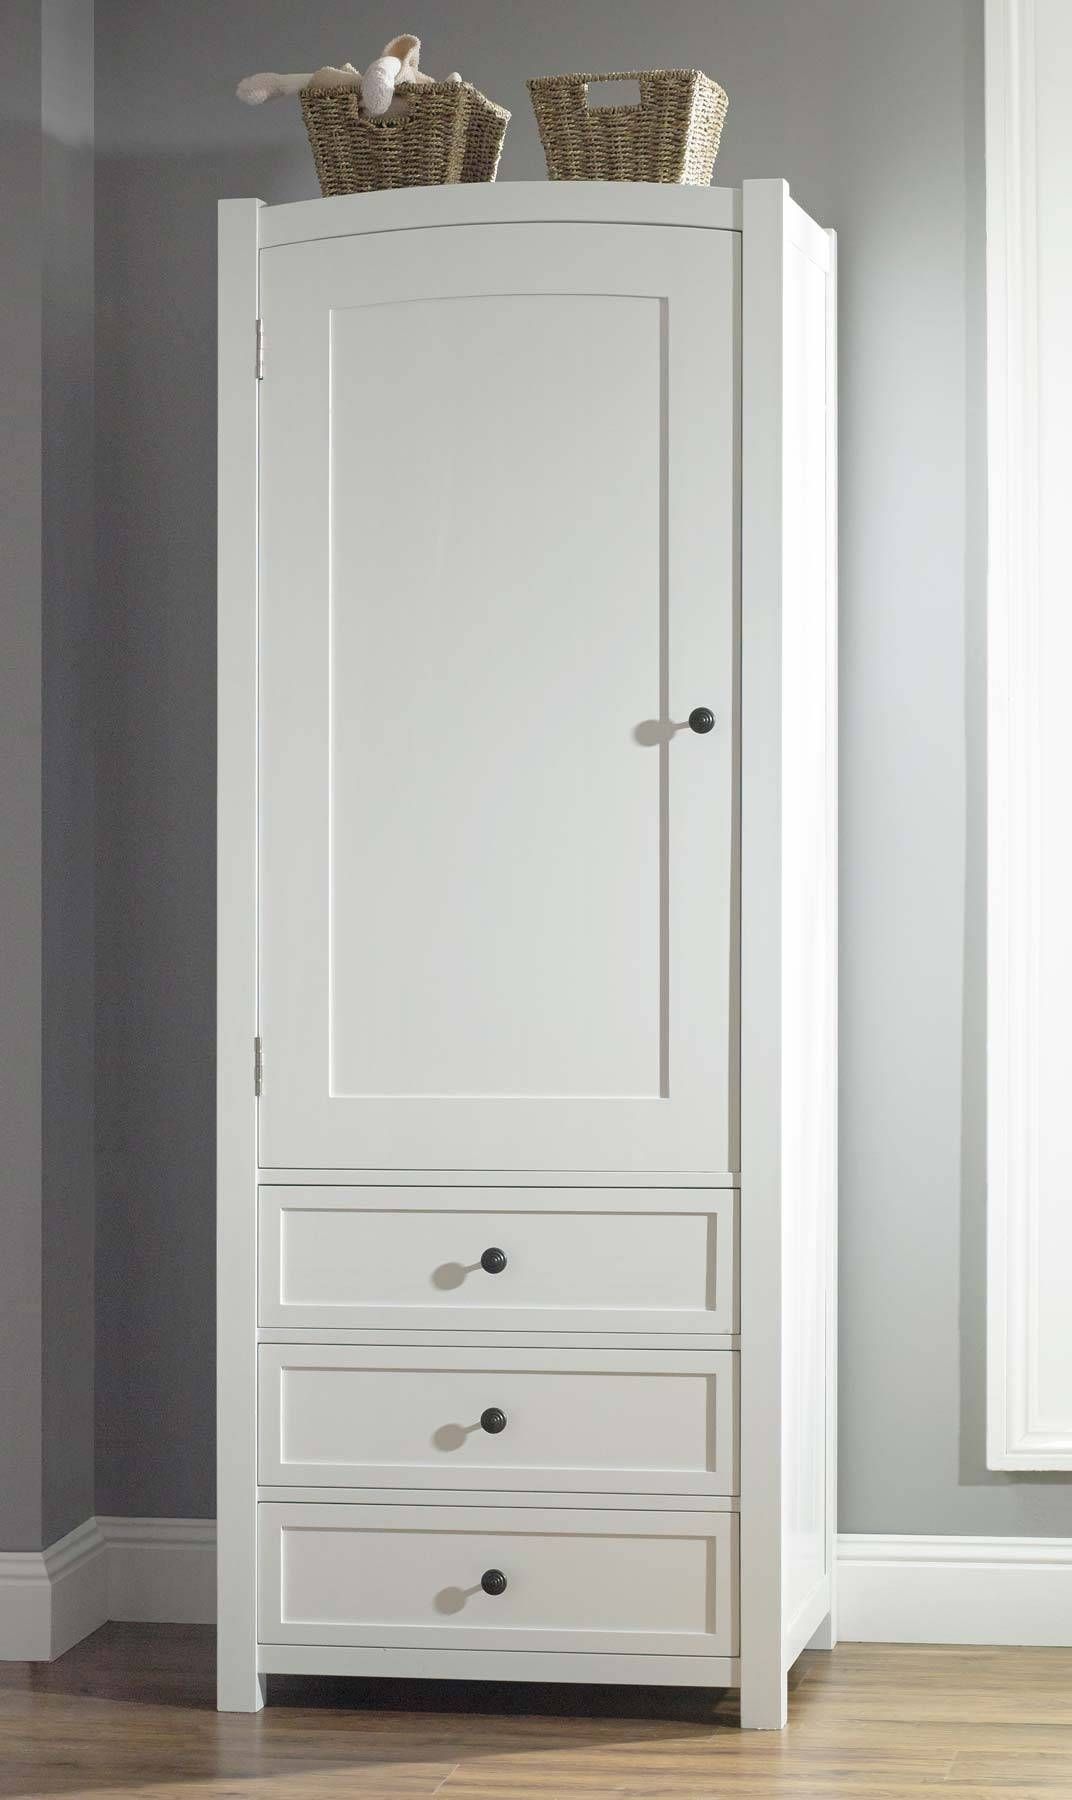 Tall Wardrobes With Drawers – Chest Of Drawers For Tall Wardrobes (View 15 of 15)